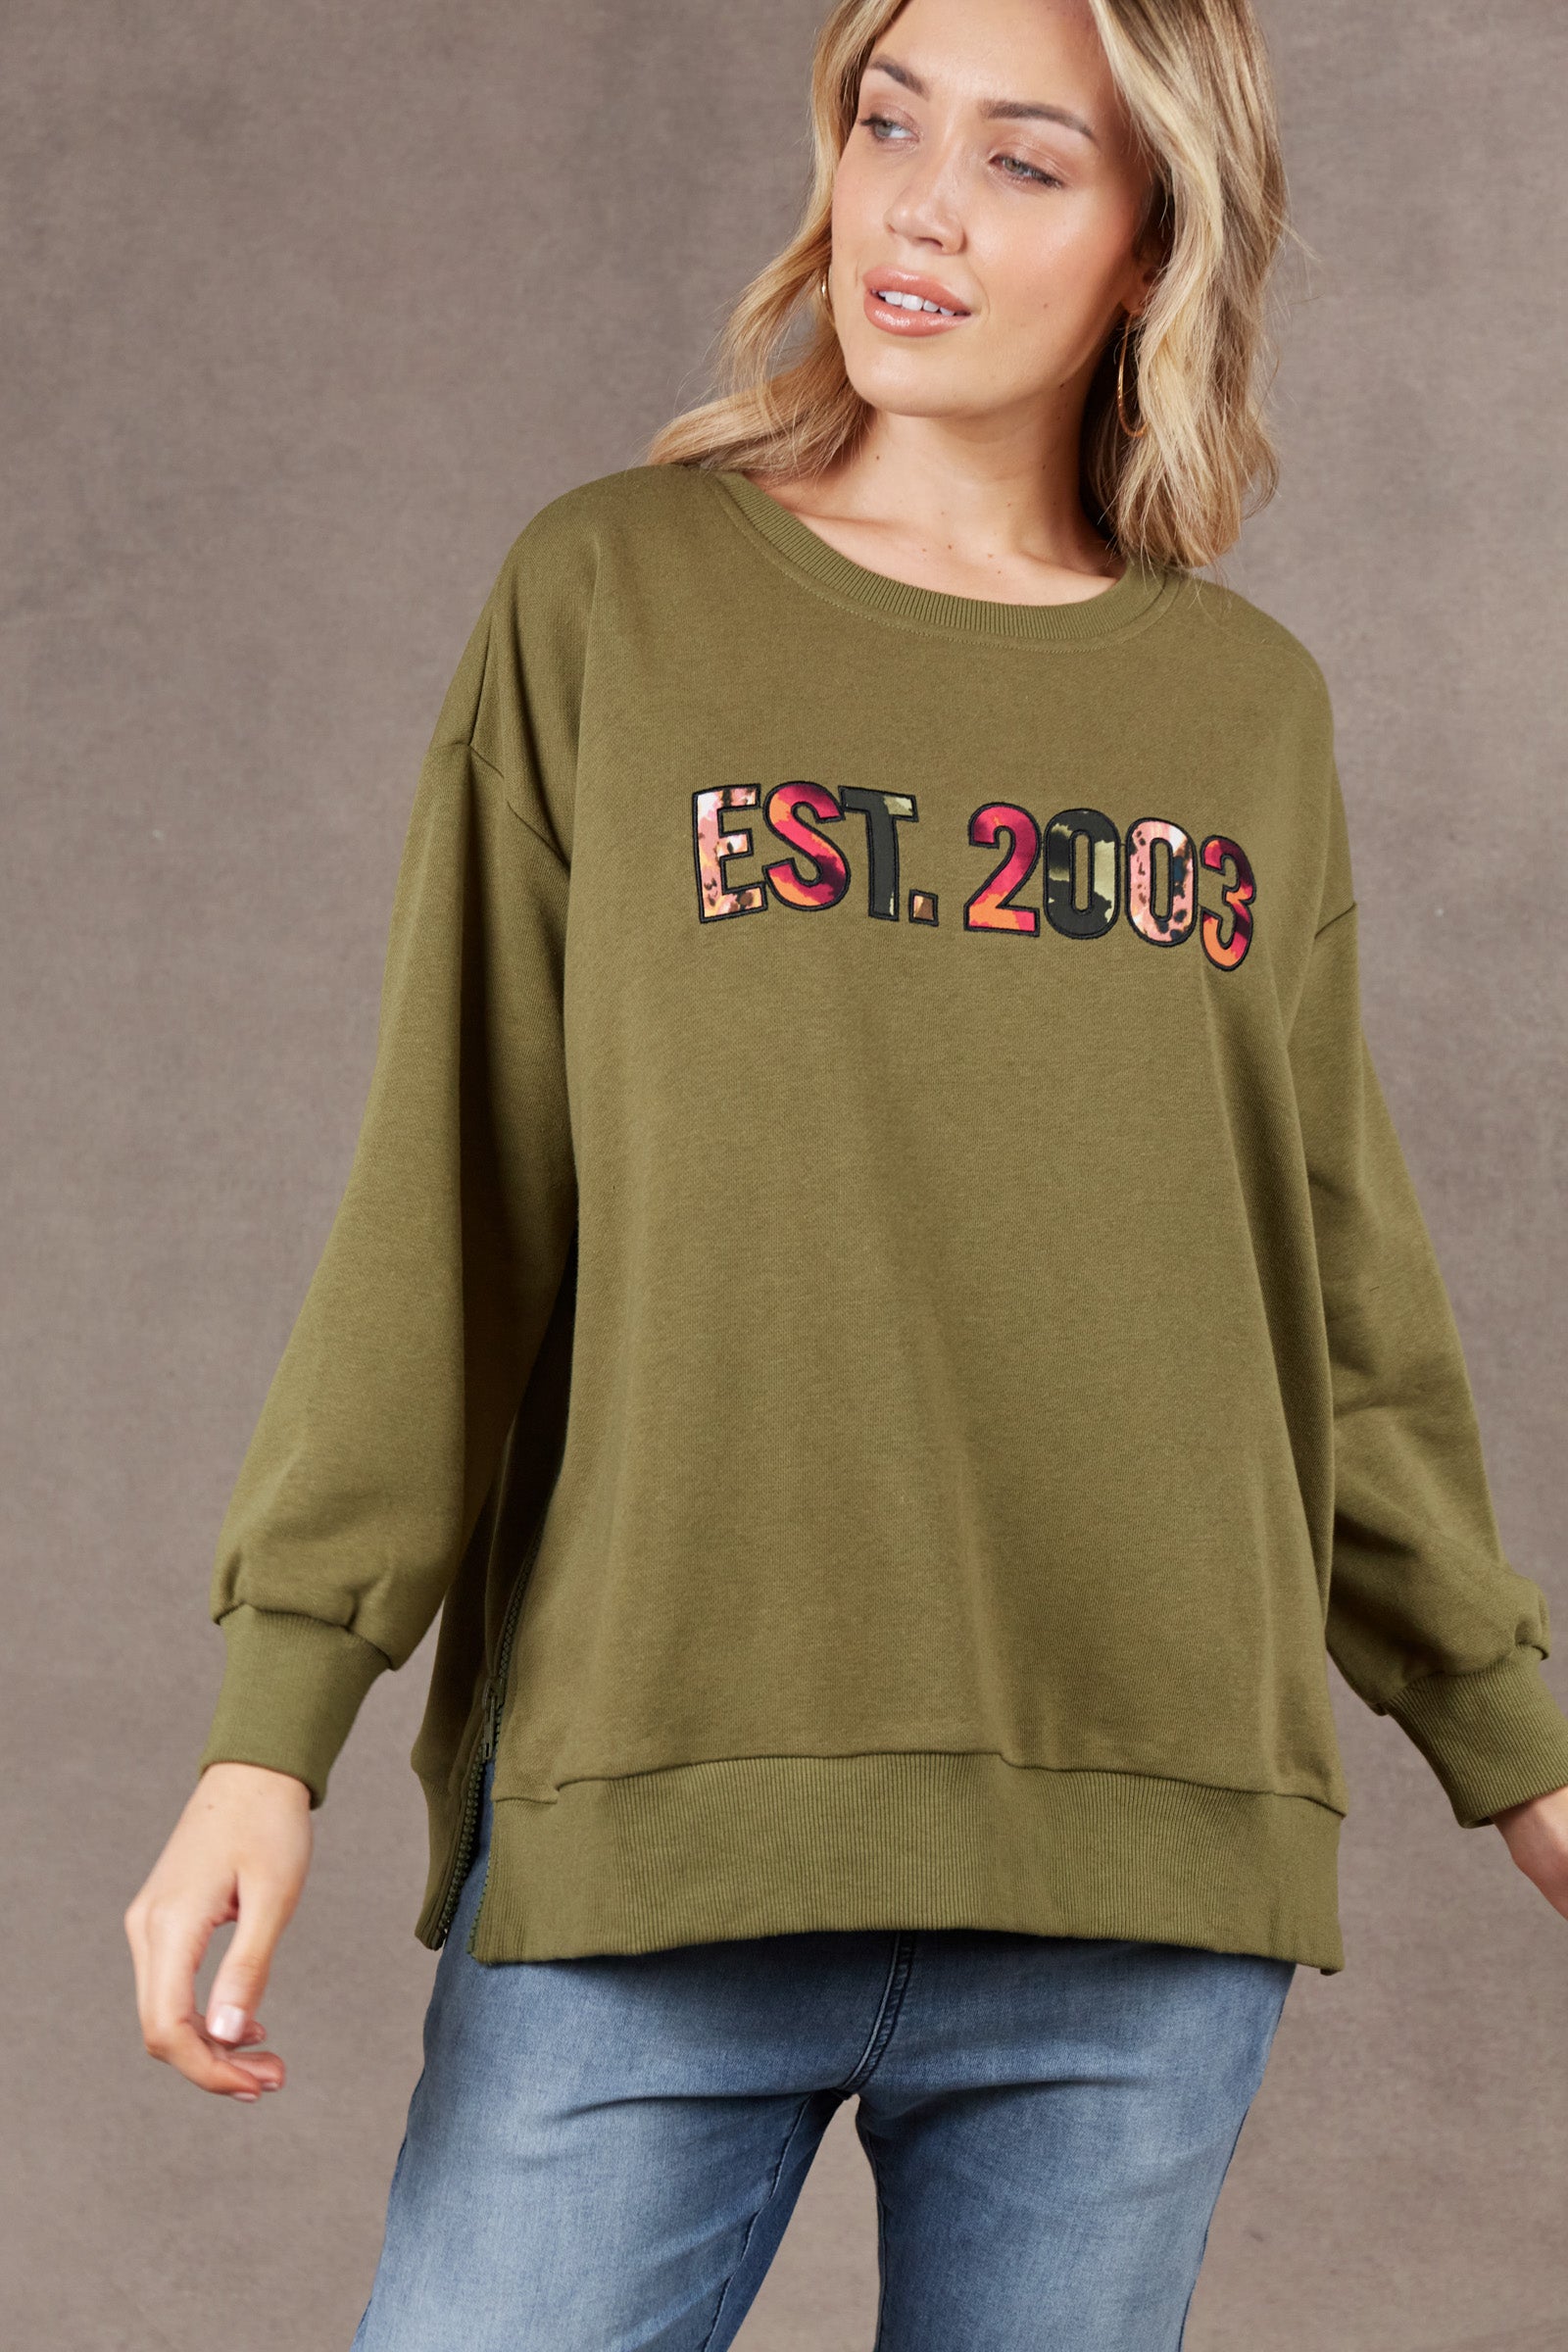 Est Sweat Top - Thyme - eb&ive Clothing - Top Jumper